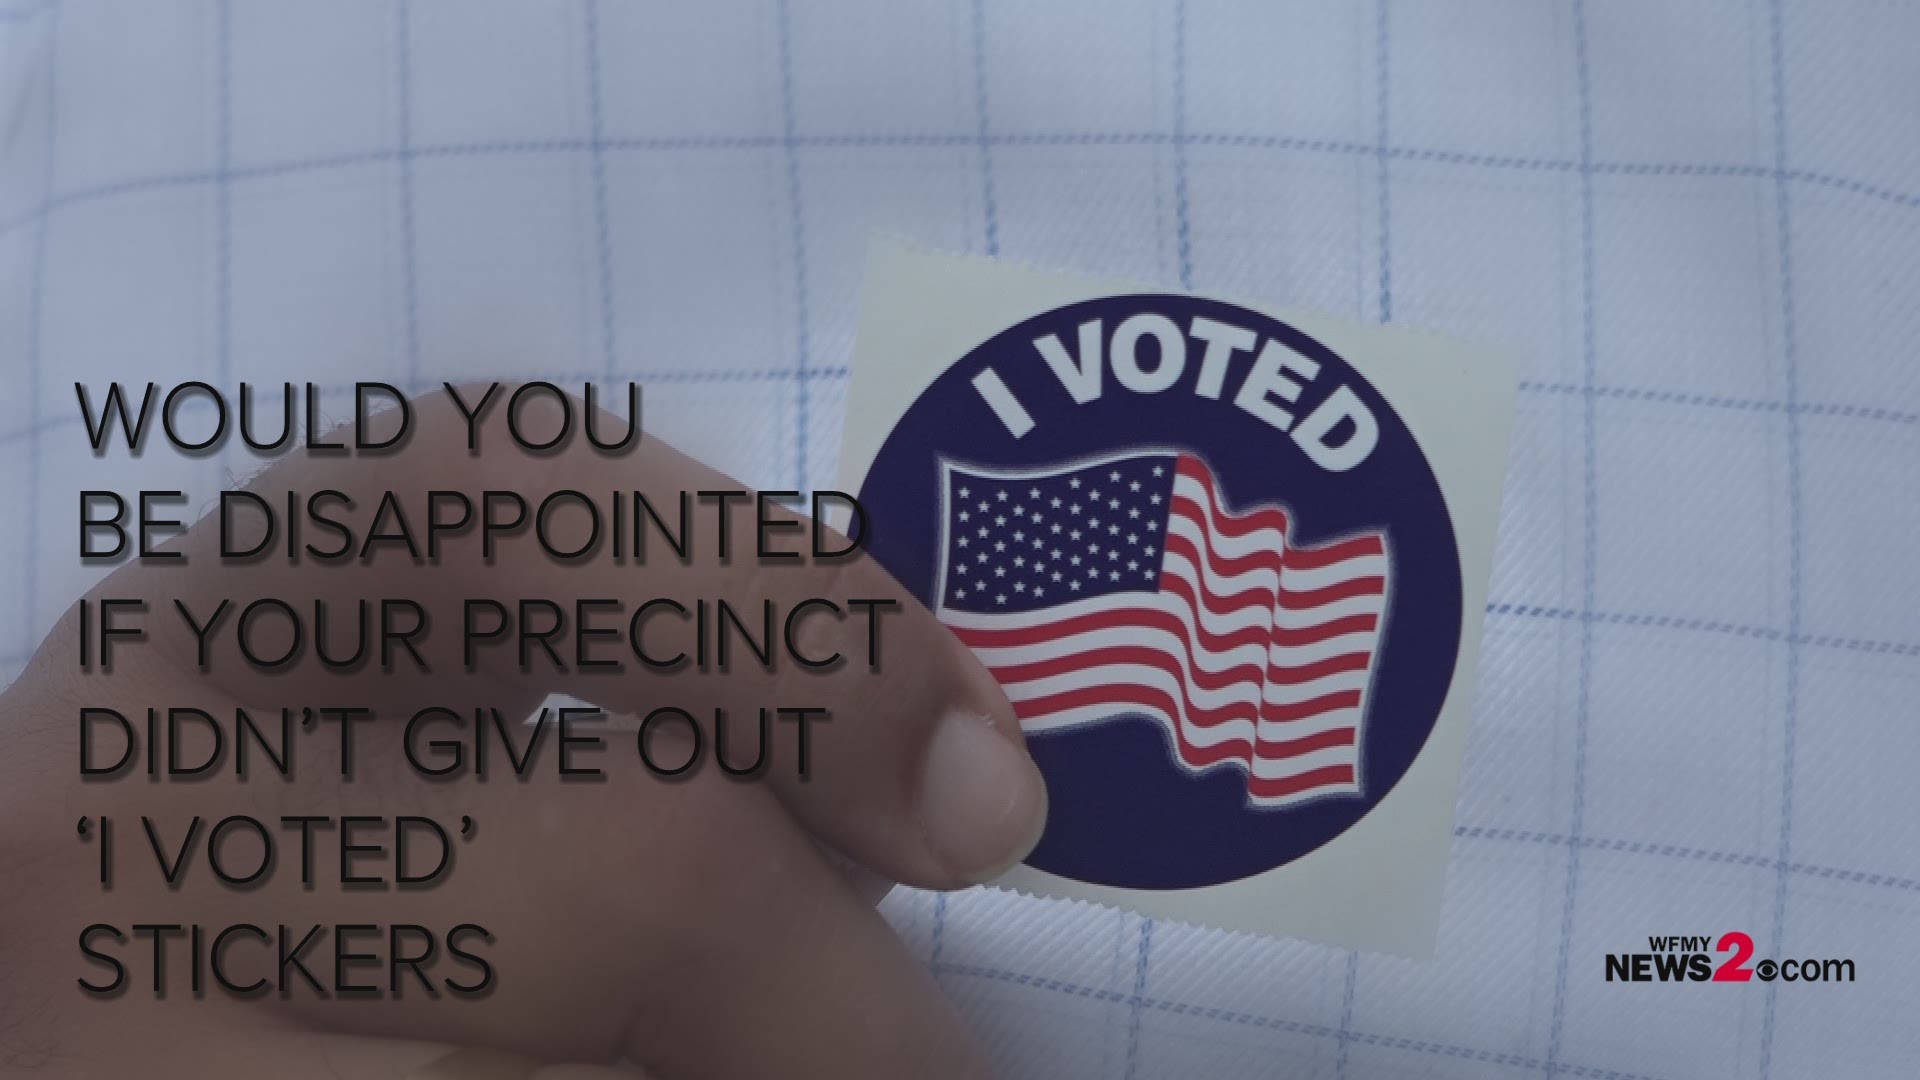 Just as folks are showing off their 'I Voted' stickers on social media, others are expressing their disappointment for not getting one. We asked voters if they'd be disappointed if their precinct didn't give them out.